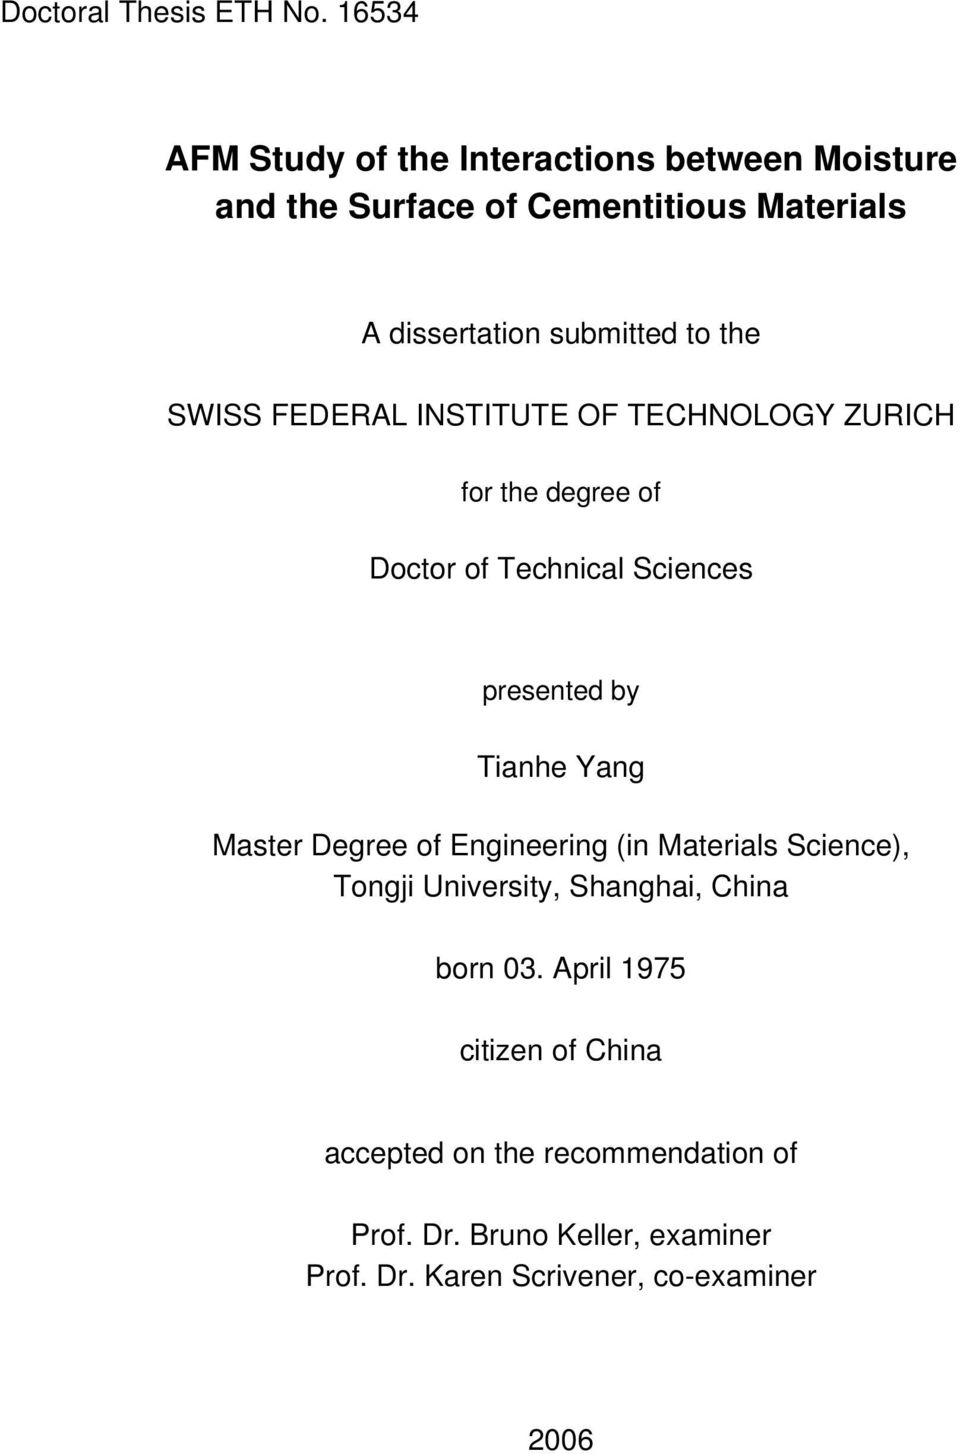 the SWISS FEDERAL INSTITUTE OF TECHNOLOGY ZURICH for the degree of Doctor of Technical Sciences presented by Tianhe Yang